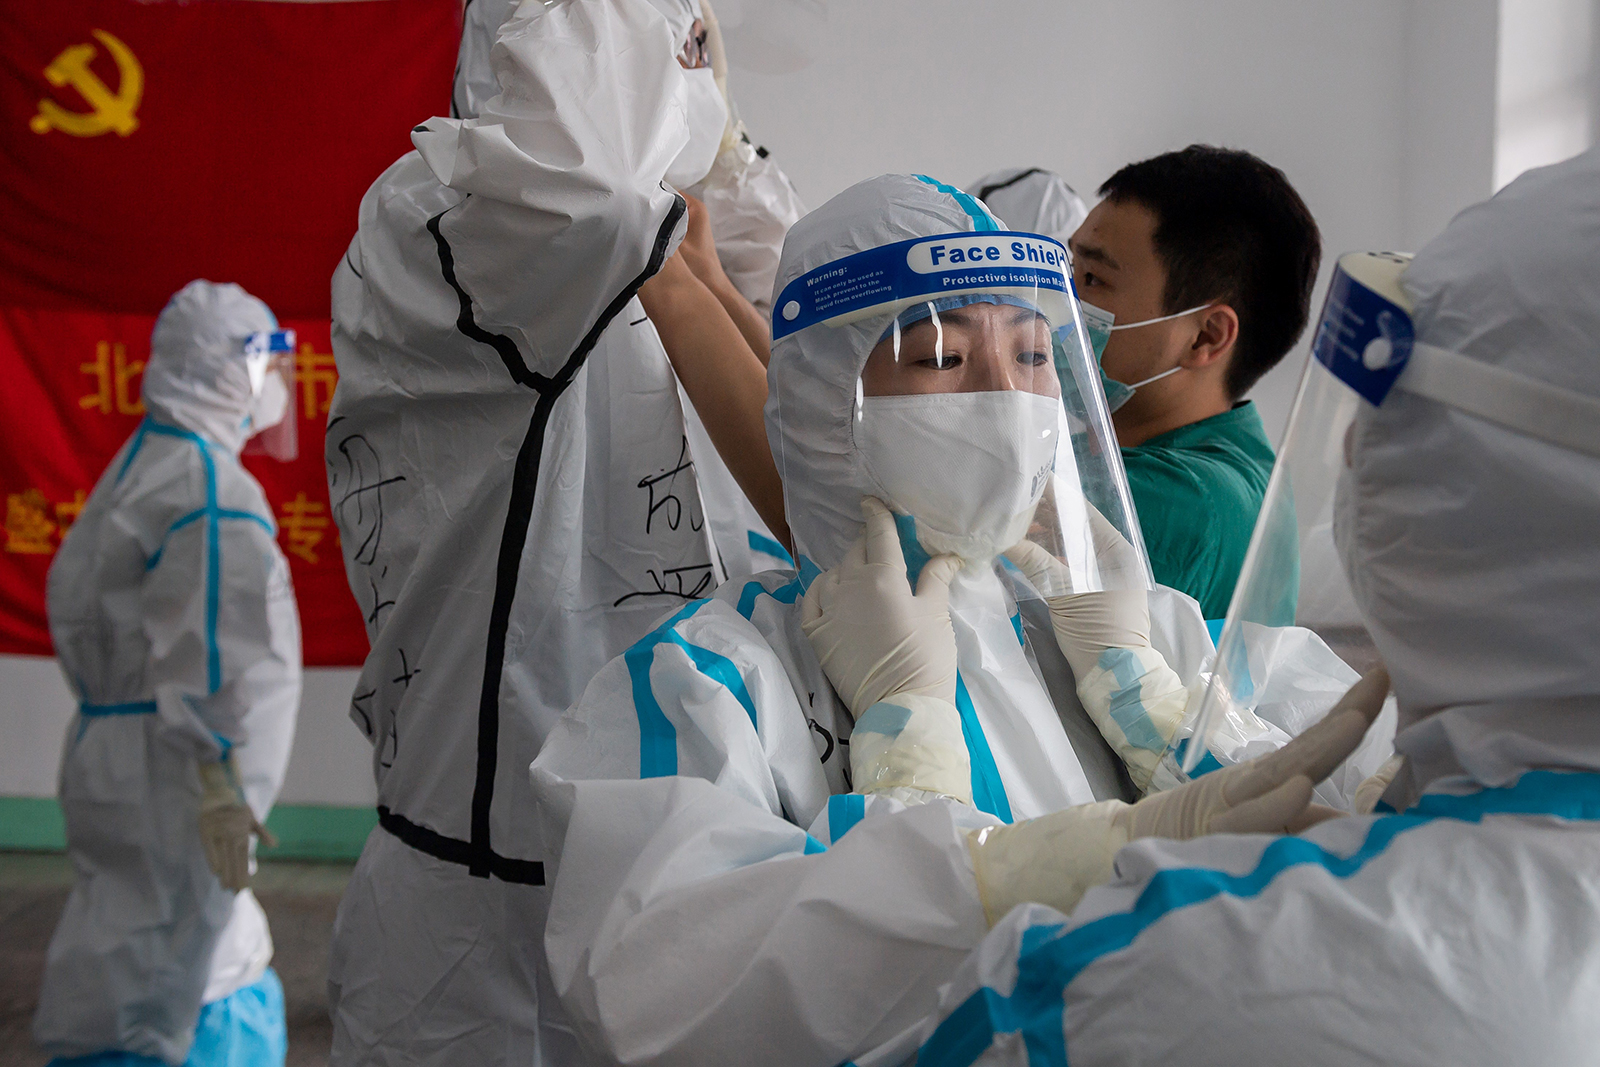 Medics prepare for their shift at the Jinrong Street testing site, in Beijing on June 24.